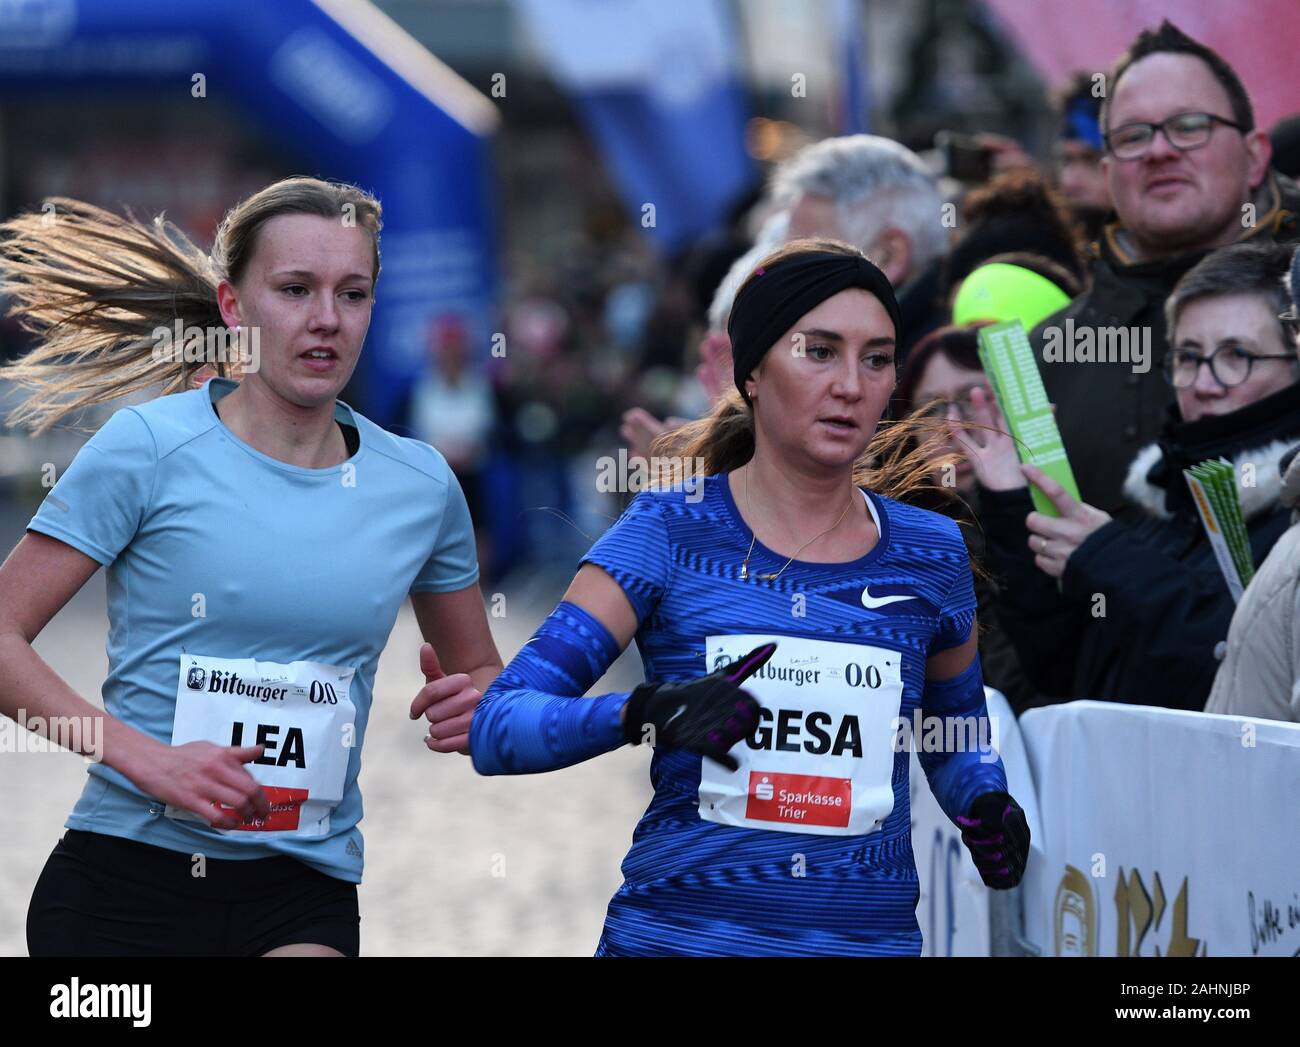 Trier, Germany. 31st Dec, 2019. International New Year's Eve race in Trier, endurance race, elite women's race over 5 km: Gesa Krause (r) runs in front of Lea Meyer Vfl Löningen) The race was attended by German and international top athletes, with a total of about 2000 runners at the start. Credit: Harald Tittel/dpa/Alamy Live News Stock Photo